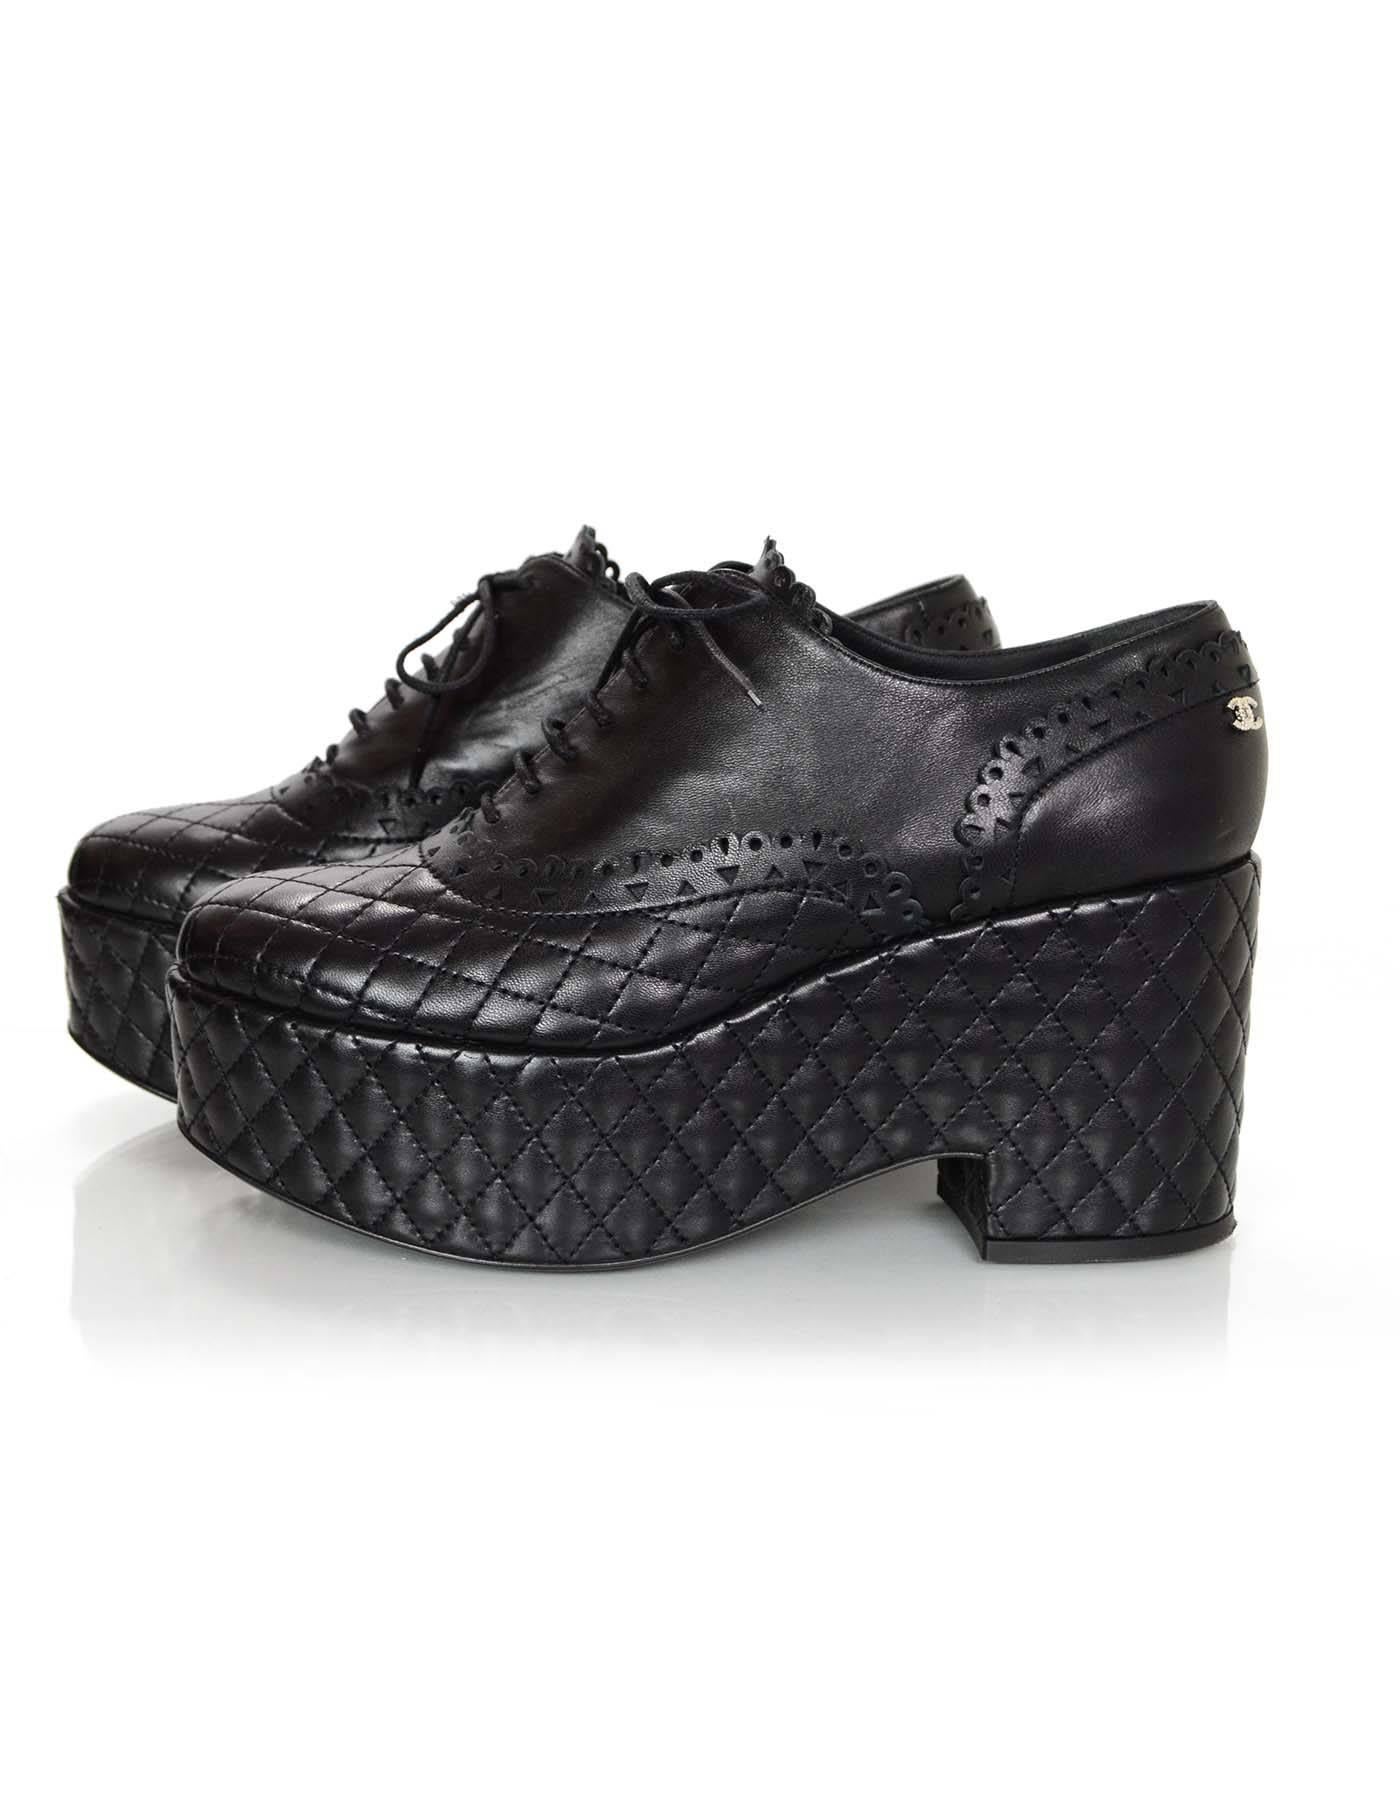 Chanel Black Quilted Oxford Platforms Sz 40.5

Made In: Italy
Color: Black
Materials: Leather
Closure/Opening: Lace tie closure
Sole Stamp: CC Made in Italy 40.5
Overall Condition: Excellent pre-owned condition with the exception of some